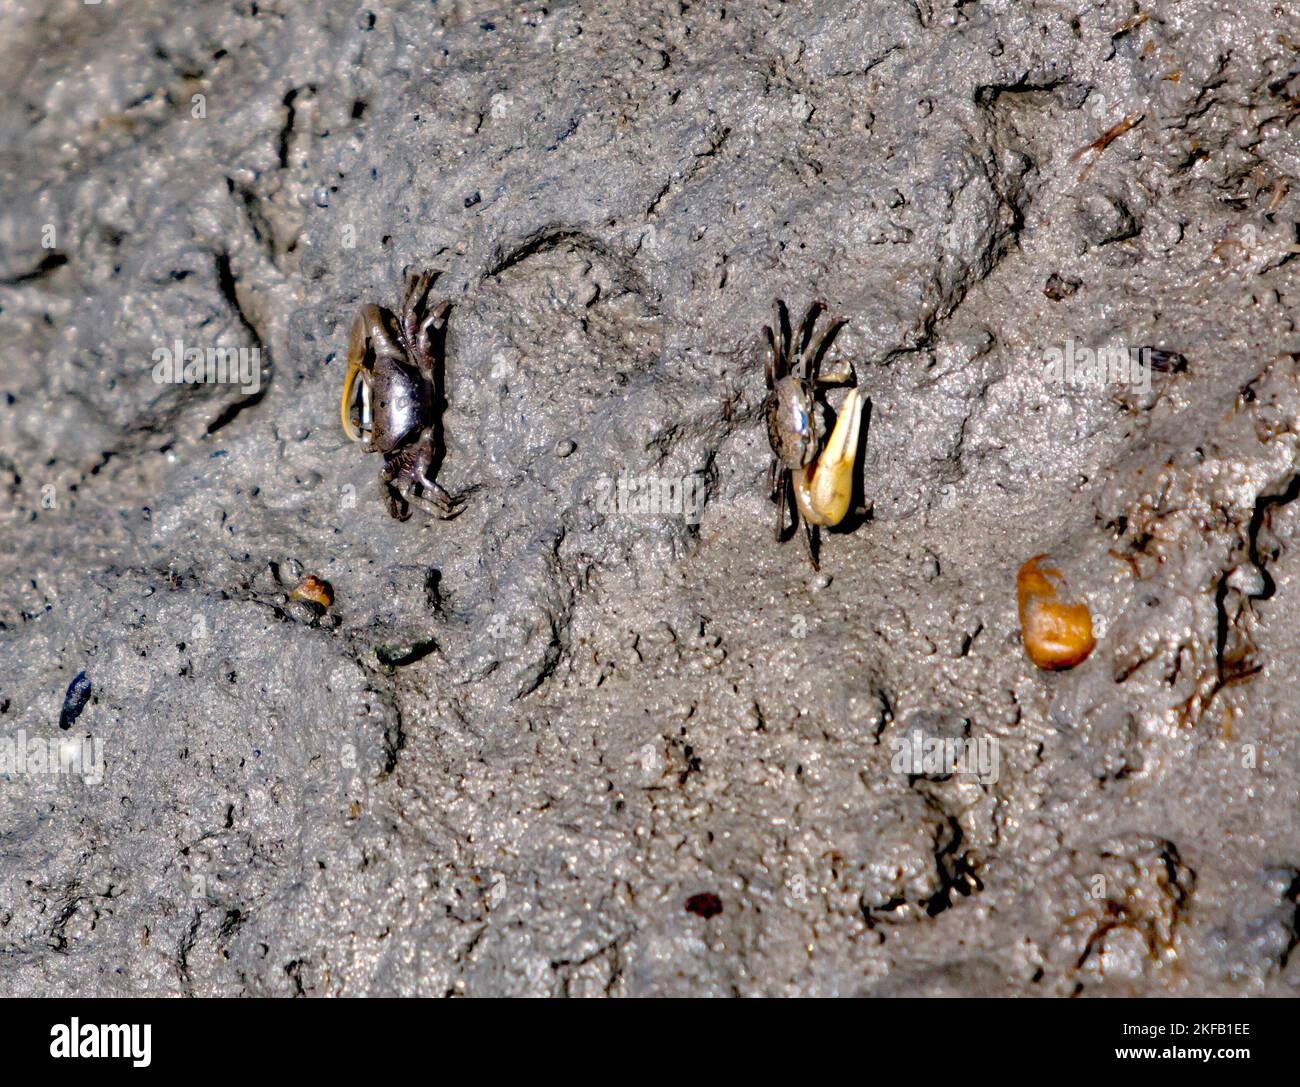 Fiddler Crabs living in a muddy bank, at the Kayak Launching area at the Eastern Shore of Virginia National Wildlife Refuge,  Delmarva Peninsula, Stock Photo